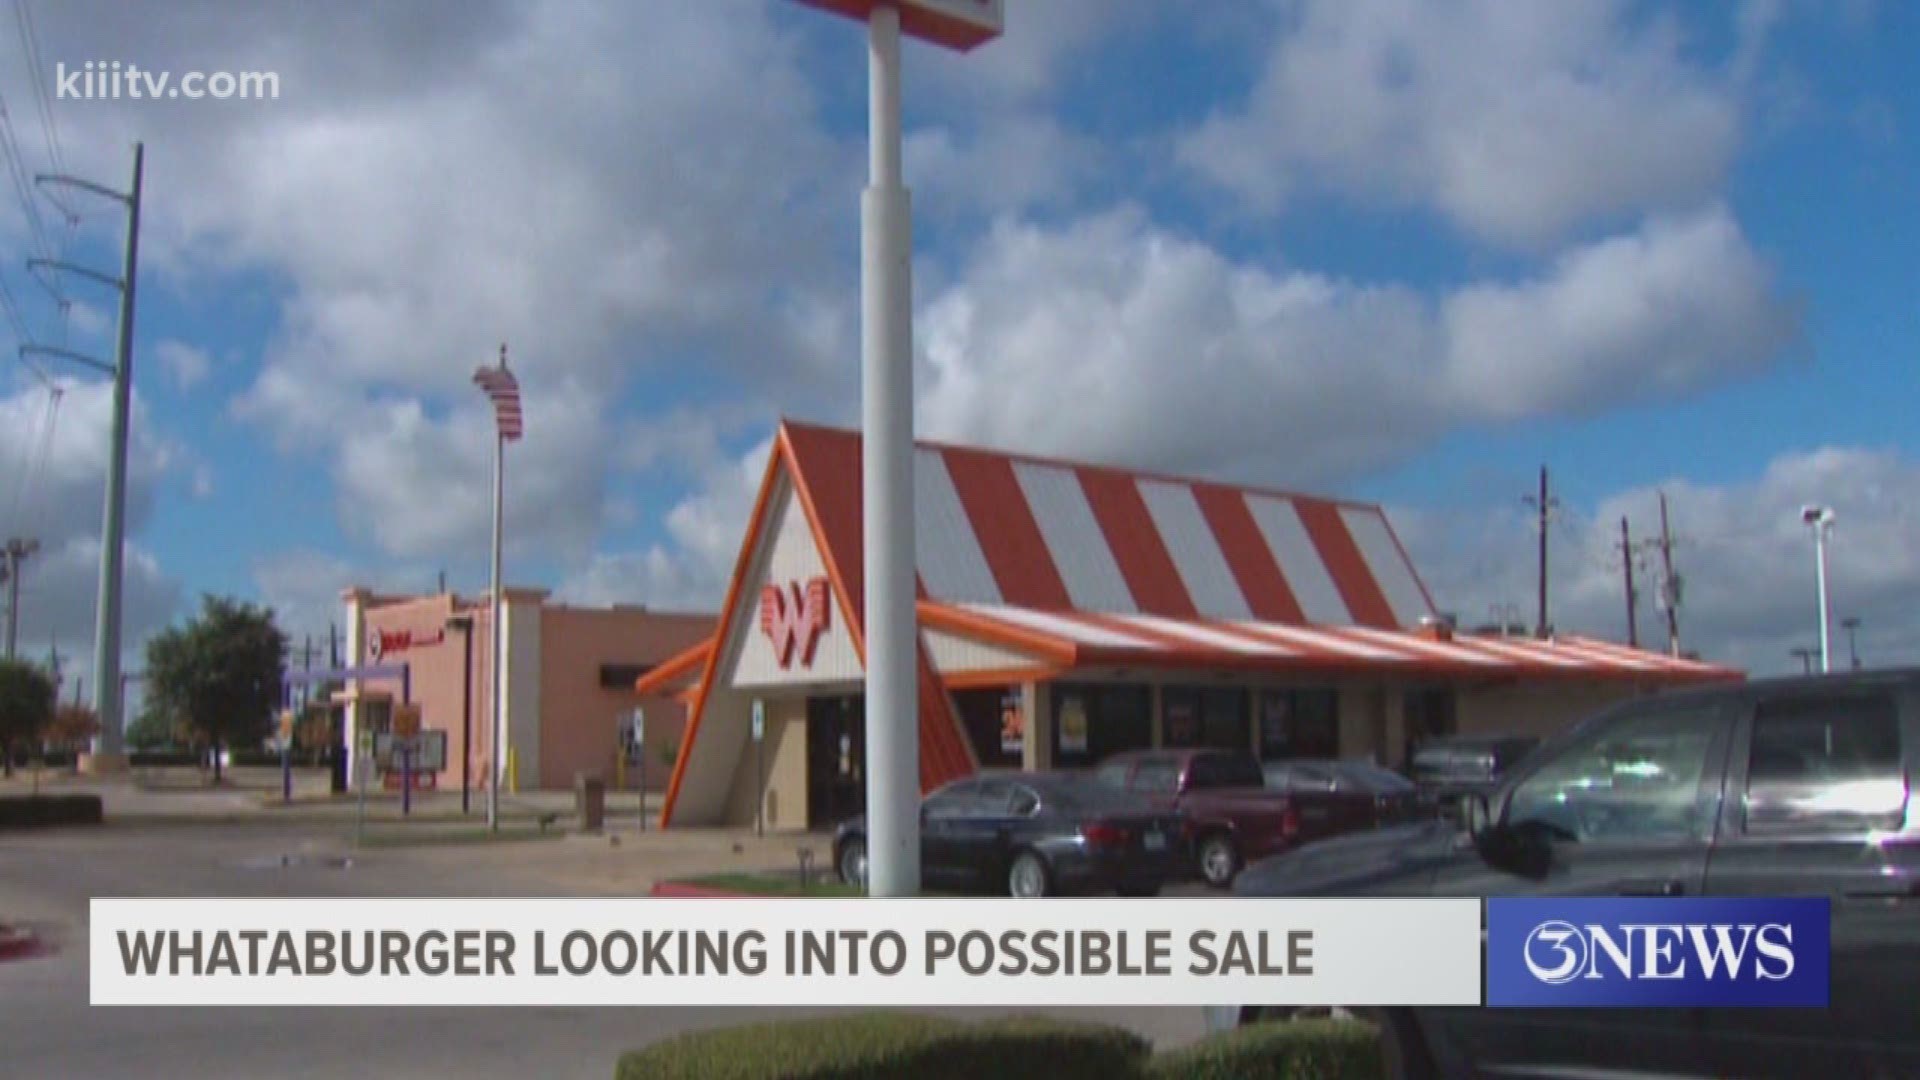 Whataburger is exploring a possible sale, the Texas fast food giant confirmed.